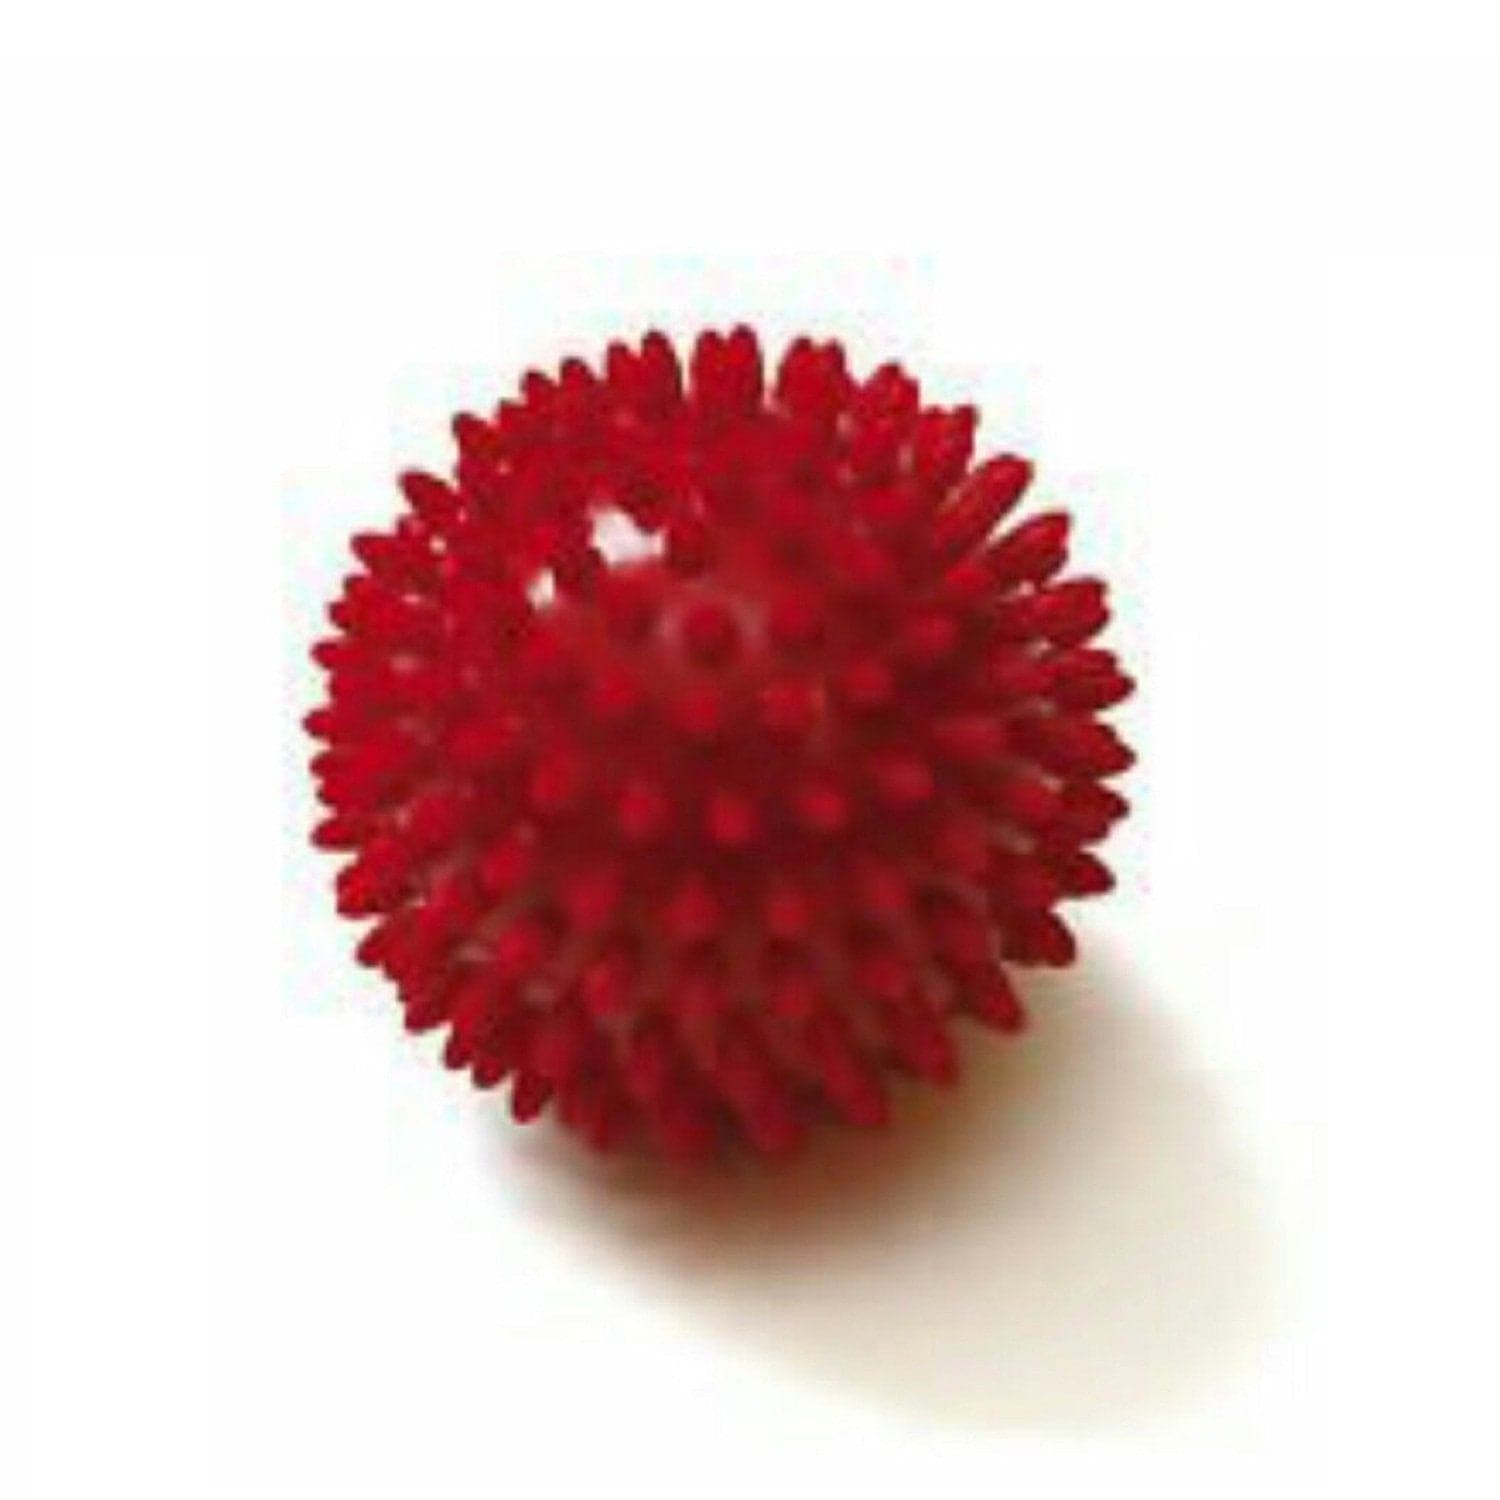 Super Dog Natural Rubber Medium Spiked Ball Dog Chew Toy - pet-club-india (7168254214294)